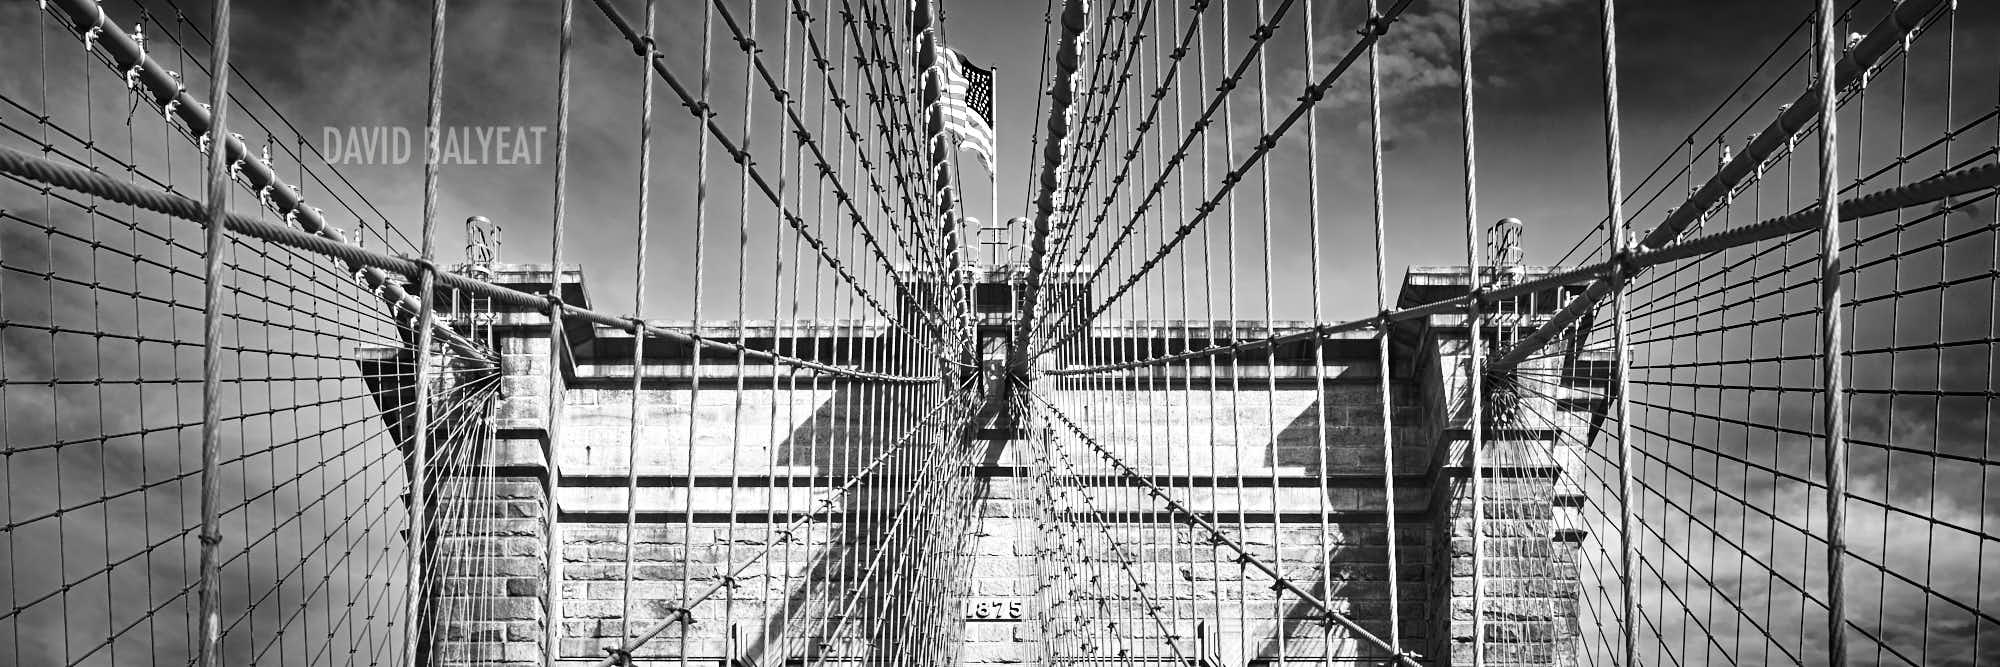 Brooklyn Bridge panoramic black and white New York City circa 1875 high-definition HD professional landscape photography